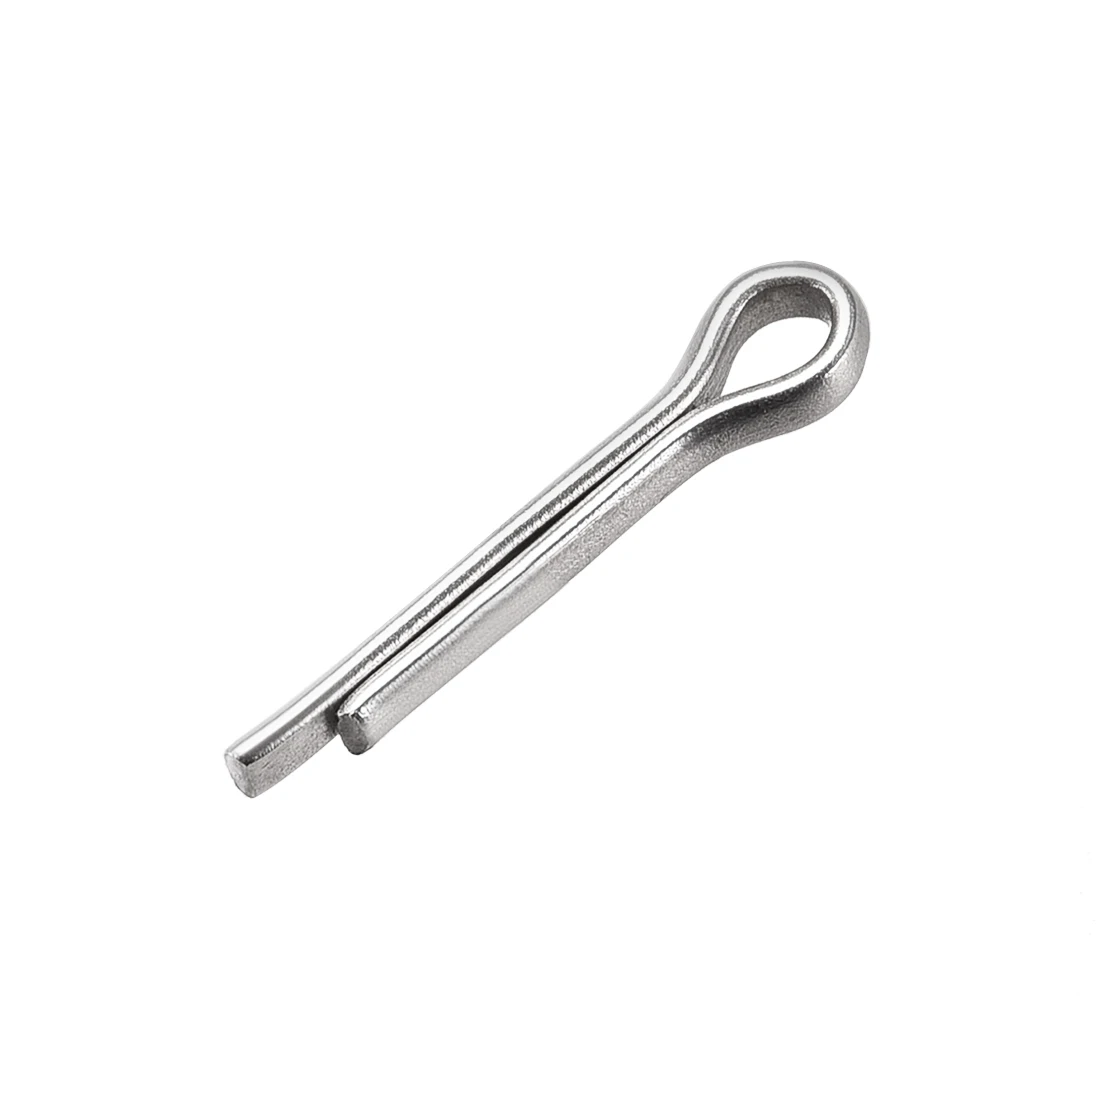 

90Pcs Split Cotter Pin - 2.7mm x 16mm 304 Stainless Steel 2-Prongs Silver Tone for Secure Clevis Pins,Castle Nuts